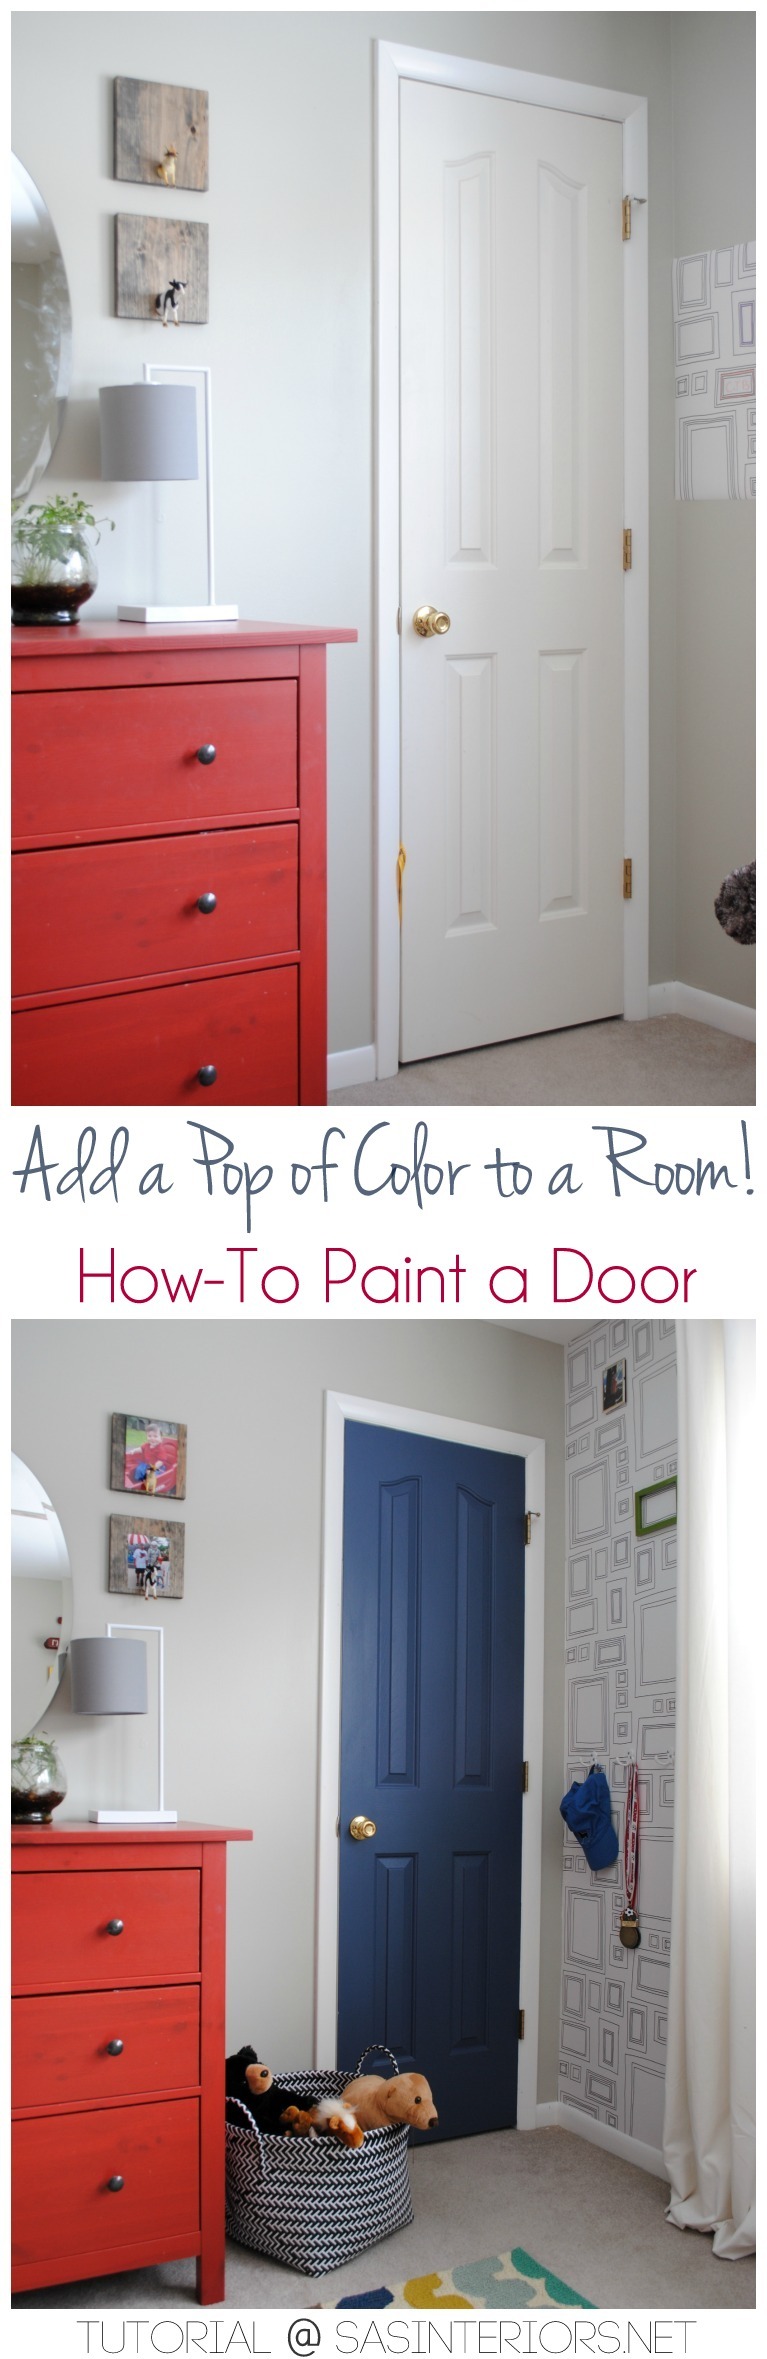 Add a Pop of COLOR by painting the door. Ditch the typical white (interior or exterior) door and add a splash of color. Check out this great how-to with 5 easy steps to transform a door!